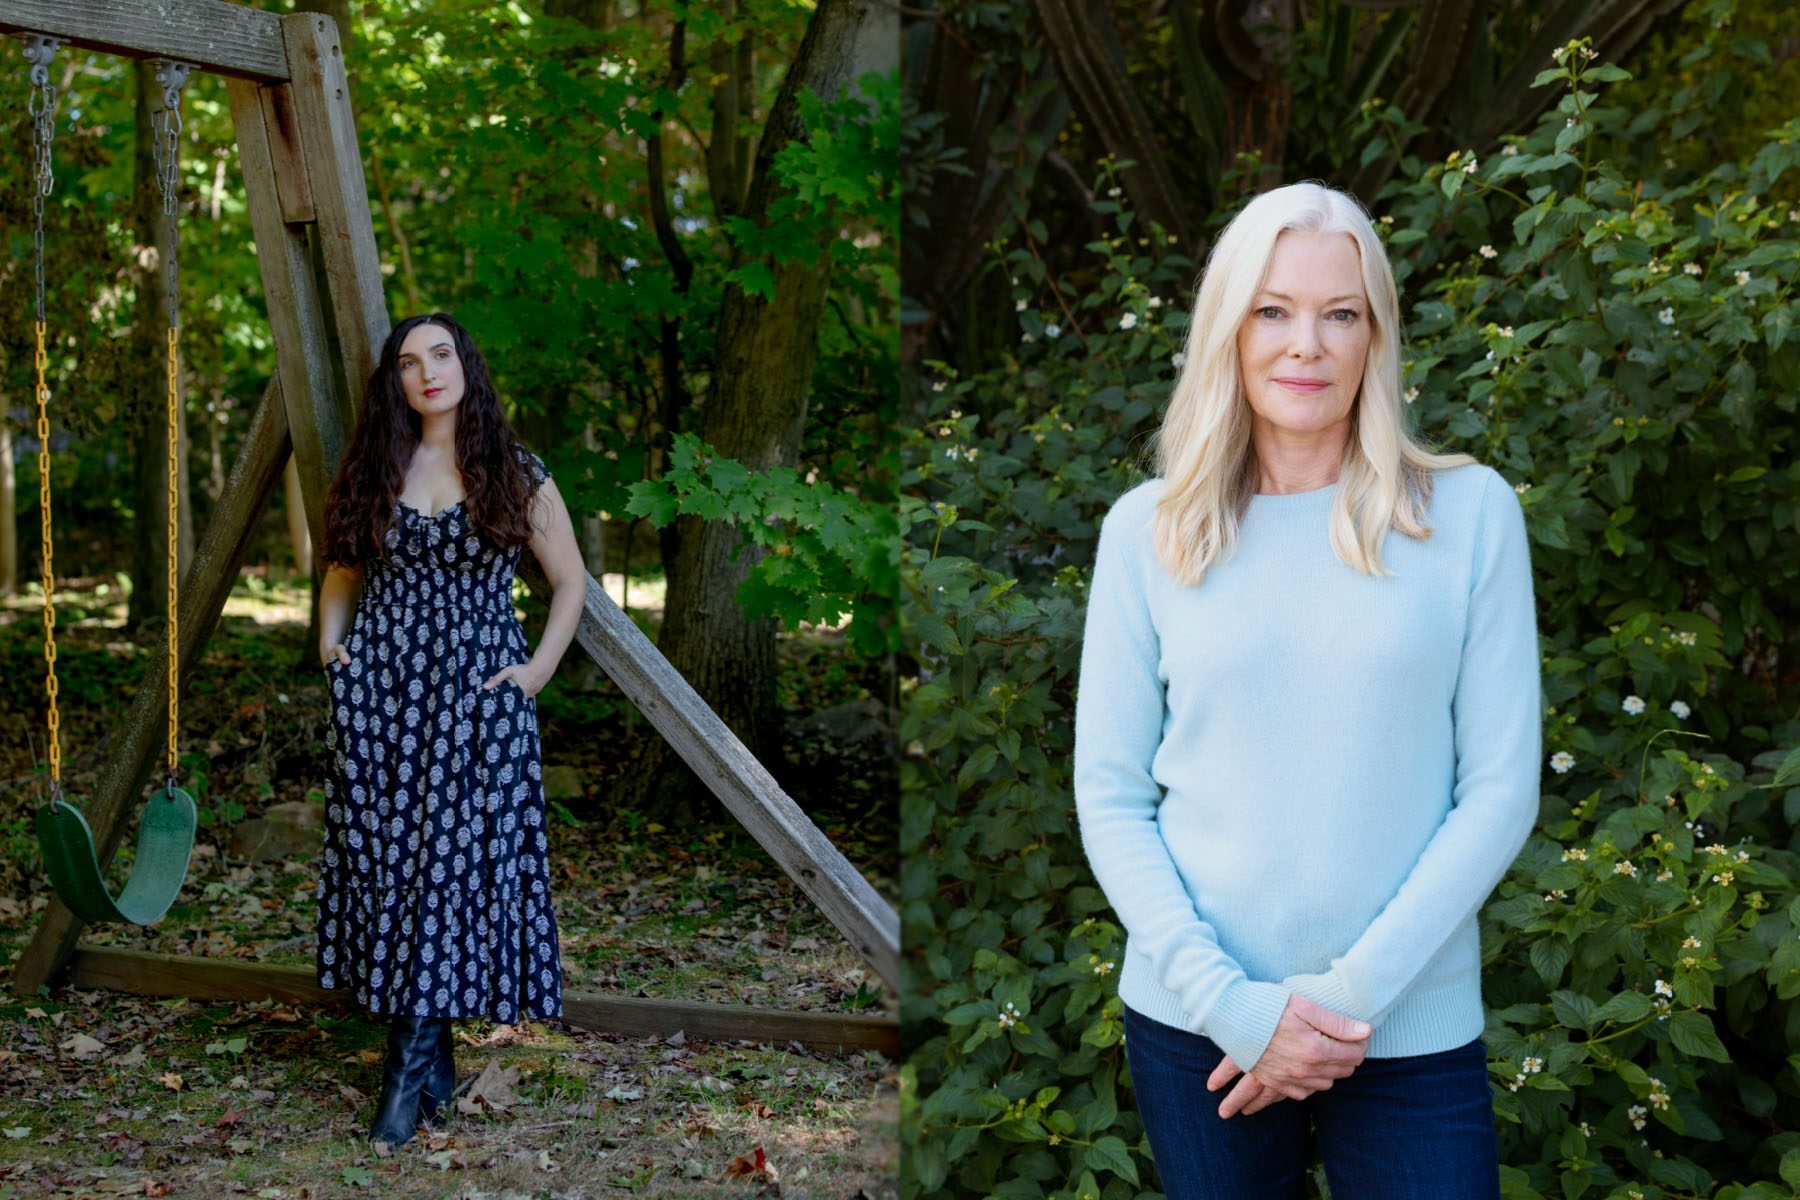 Diptych of Sarah Ann Masse and Caitlin Dulany posing for portraits in their backyards.